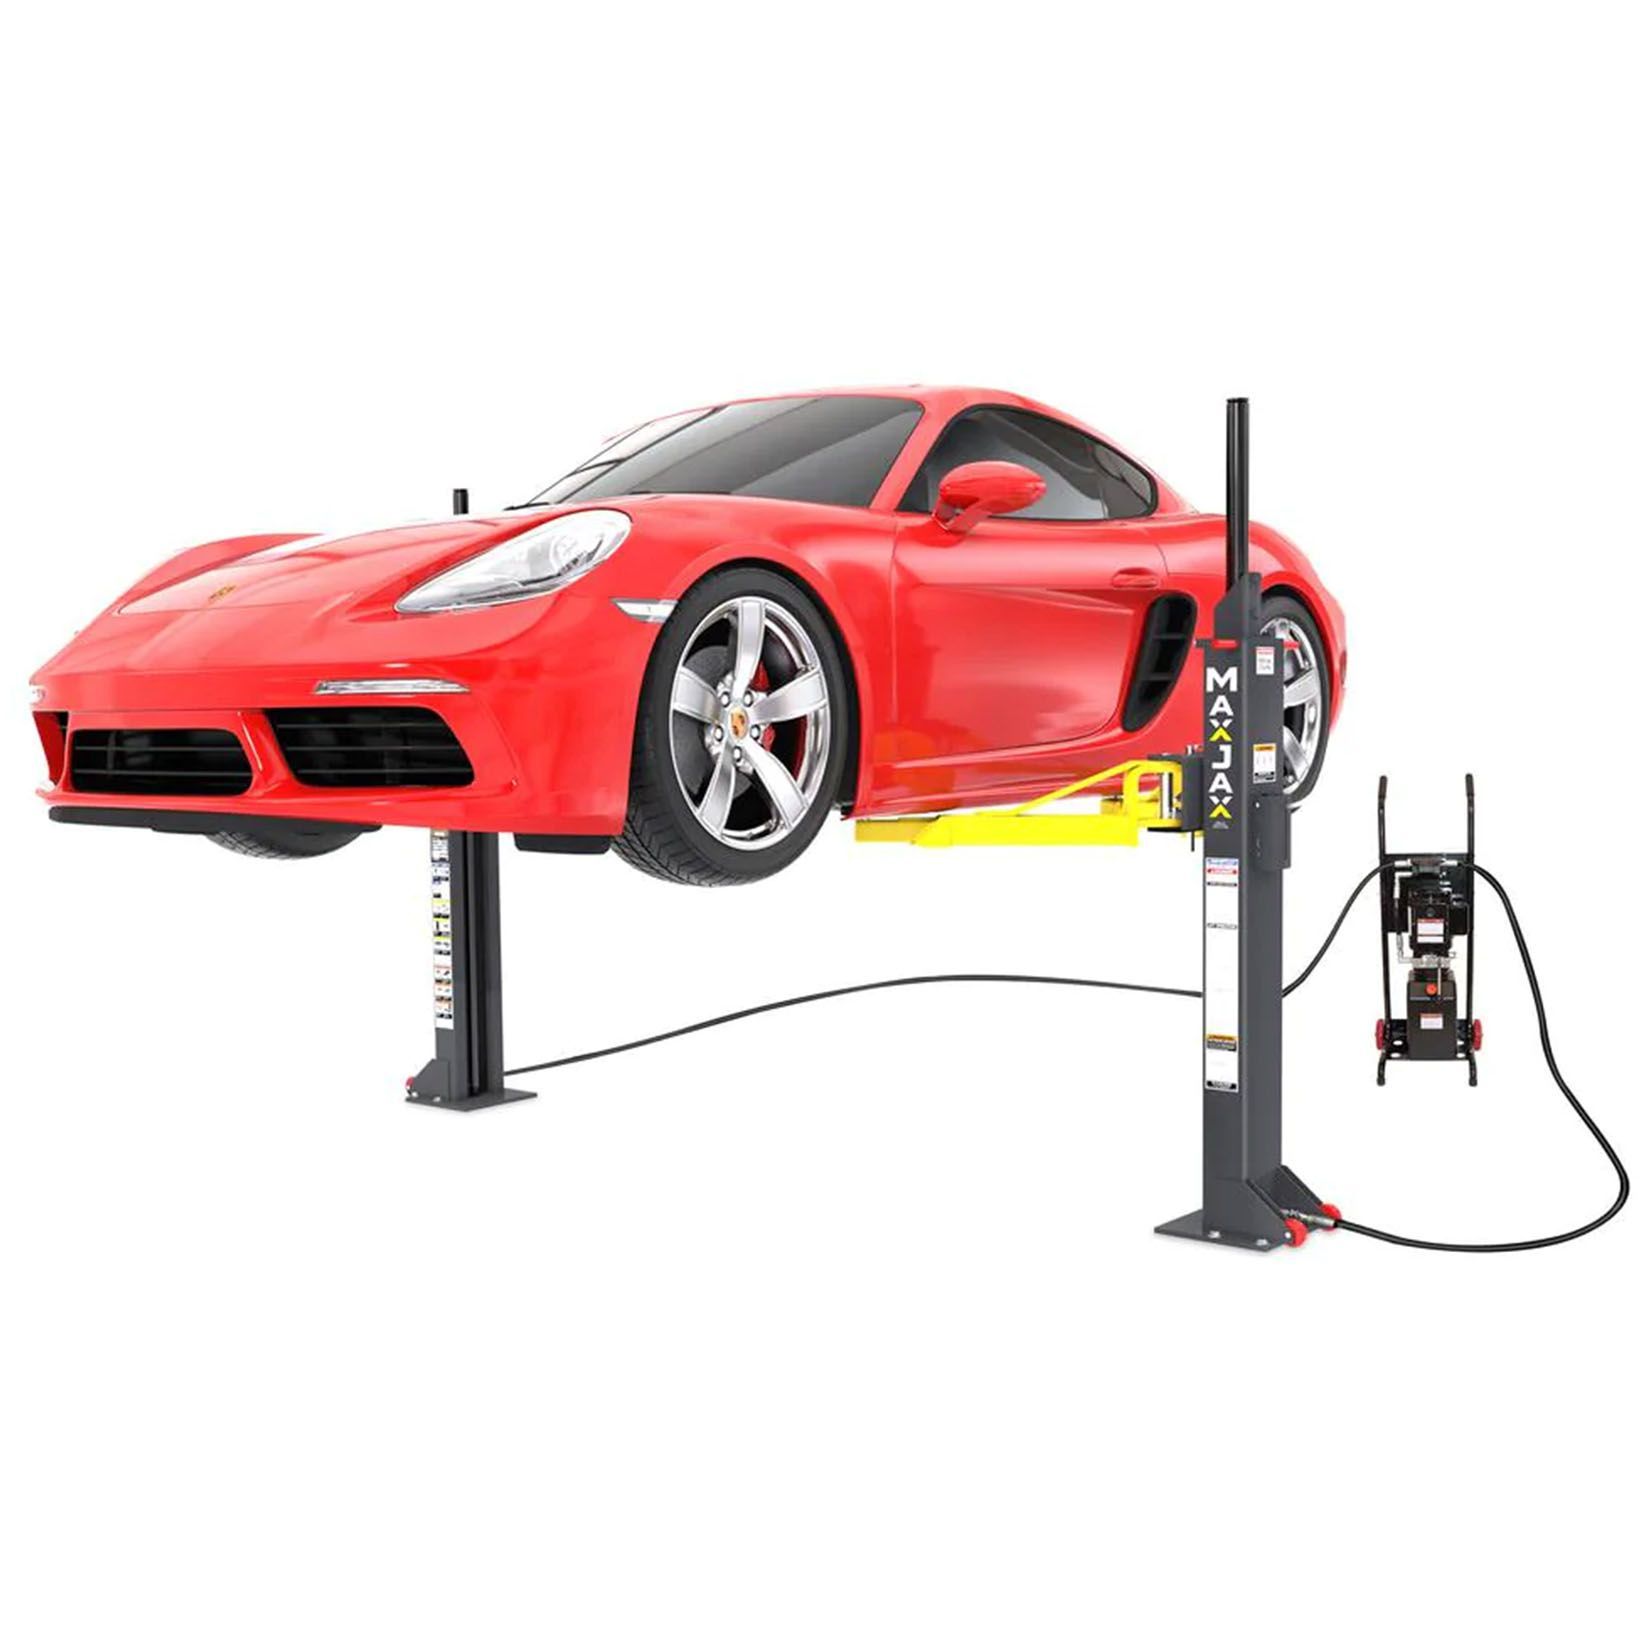 Vehicle Lifts For Your Home Garage, Best 2 Post Car Lift For Home Garage